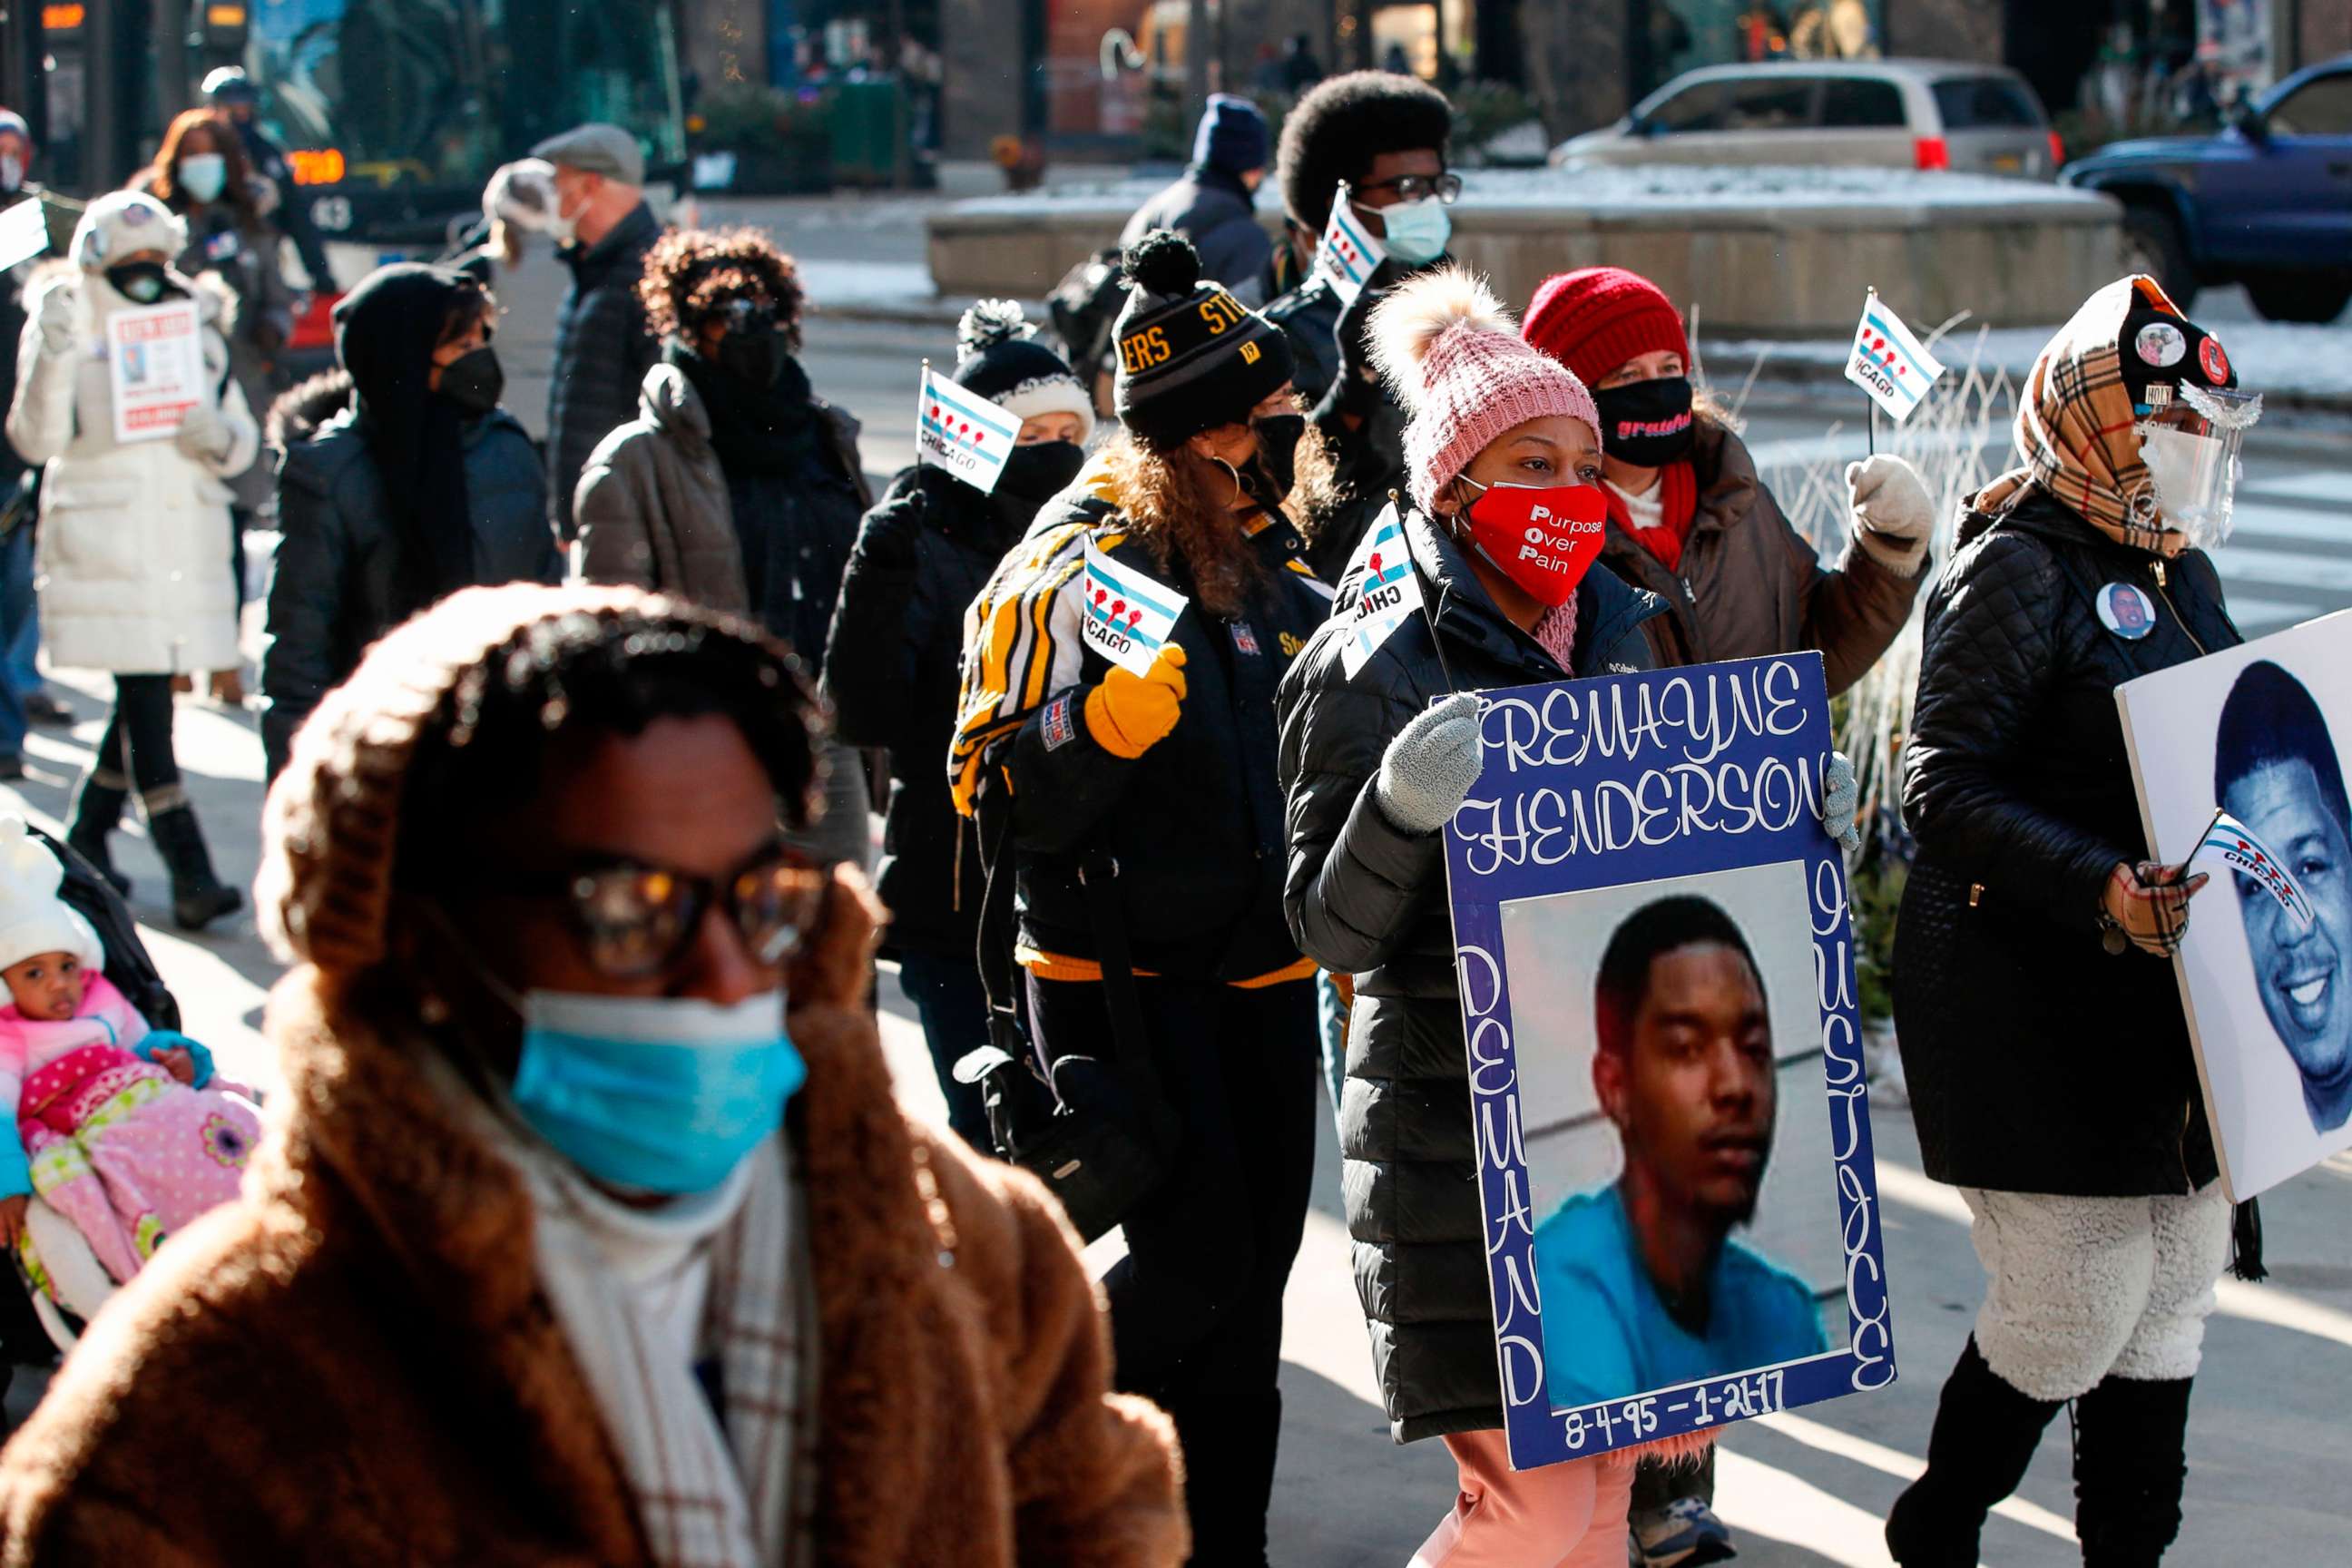 PHOTO: People participate in a march against gun violence on the Magnificent Mile in Chicago on Dec. 31, 2020.